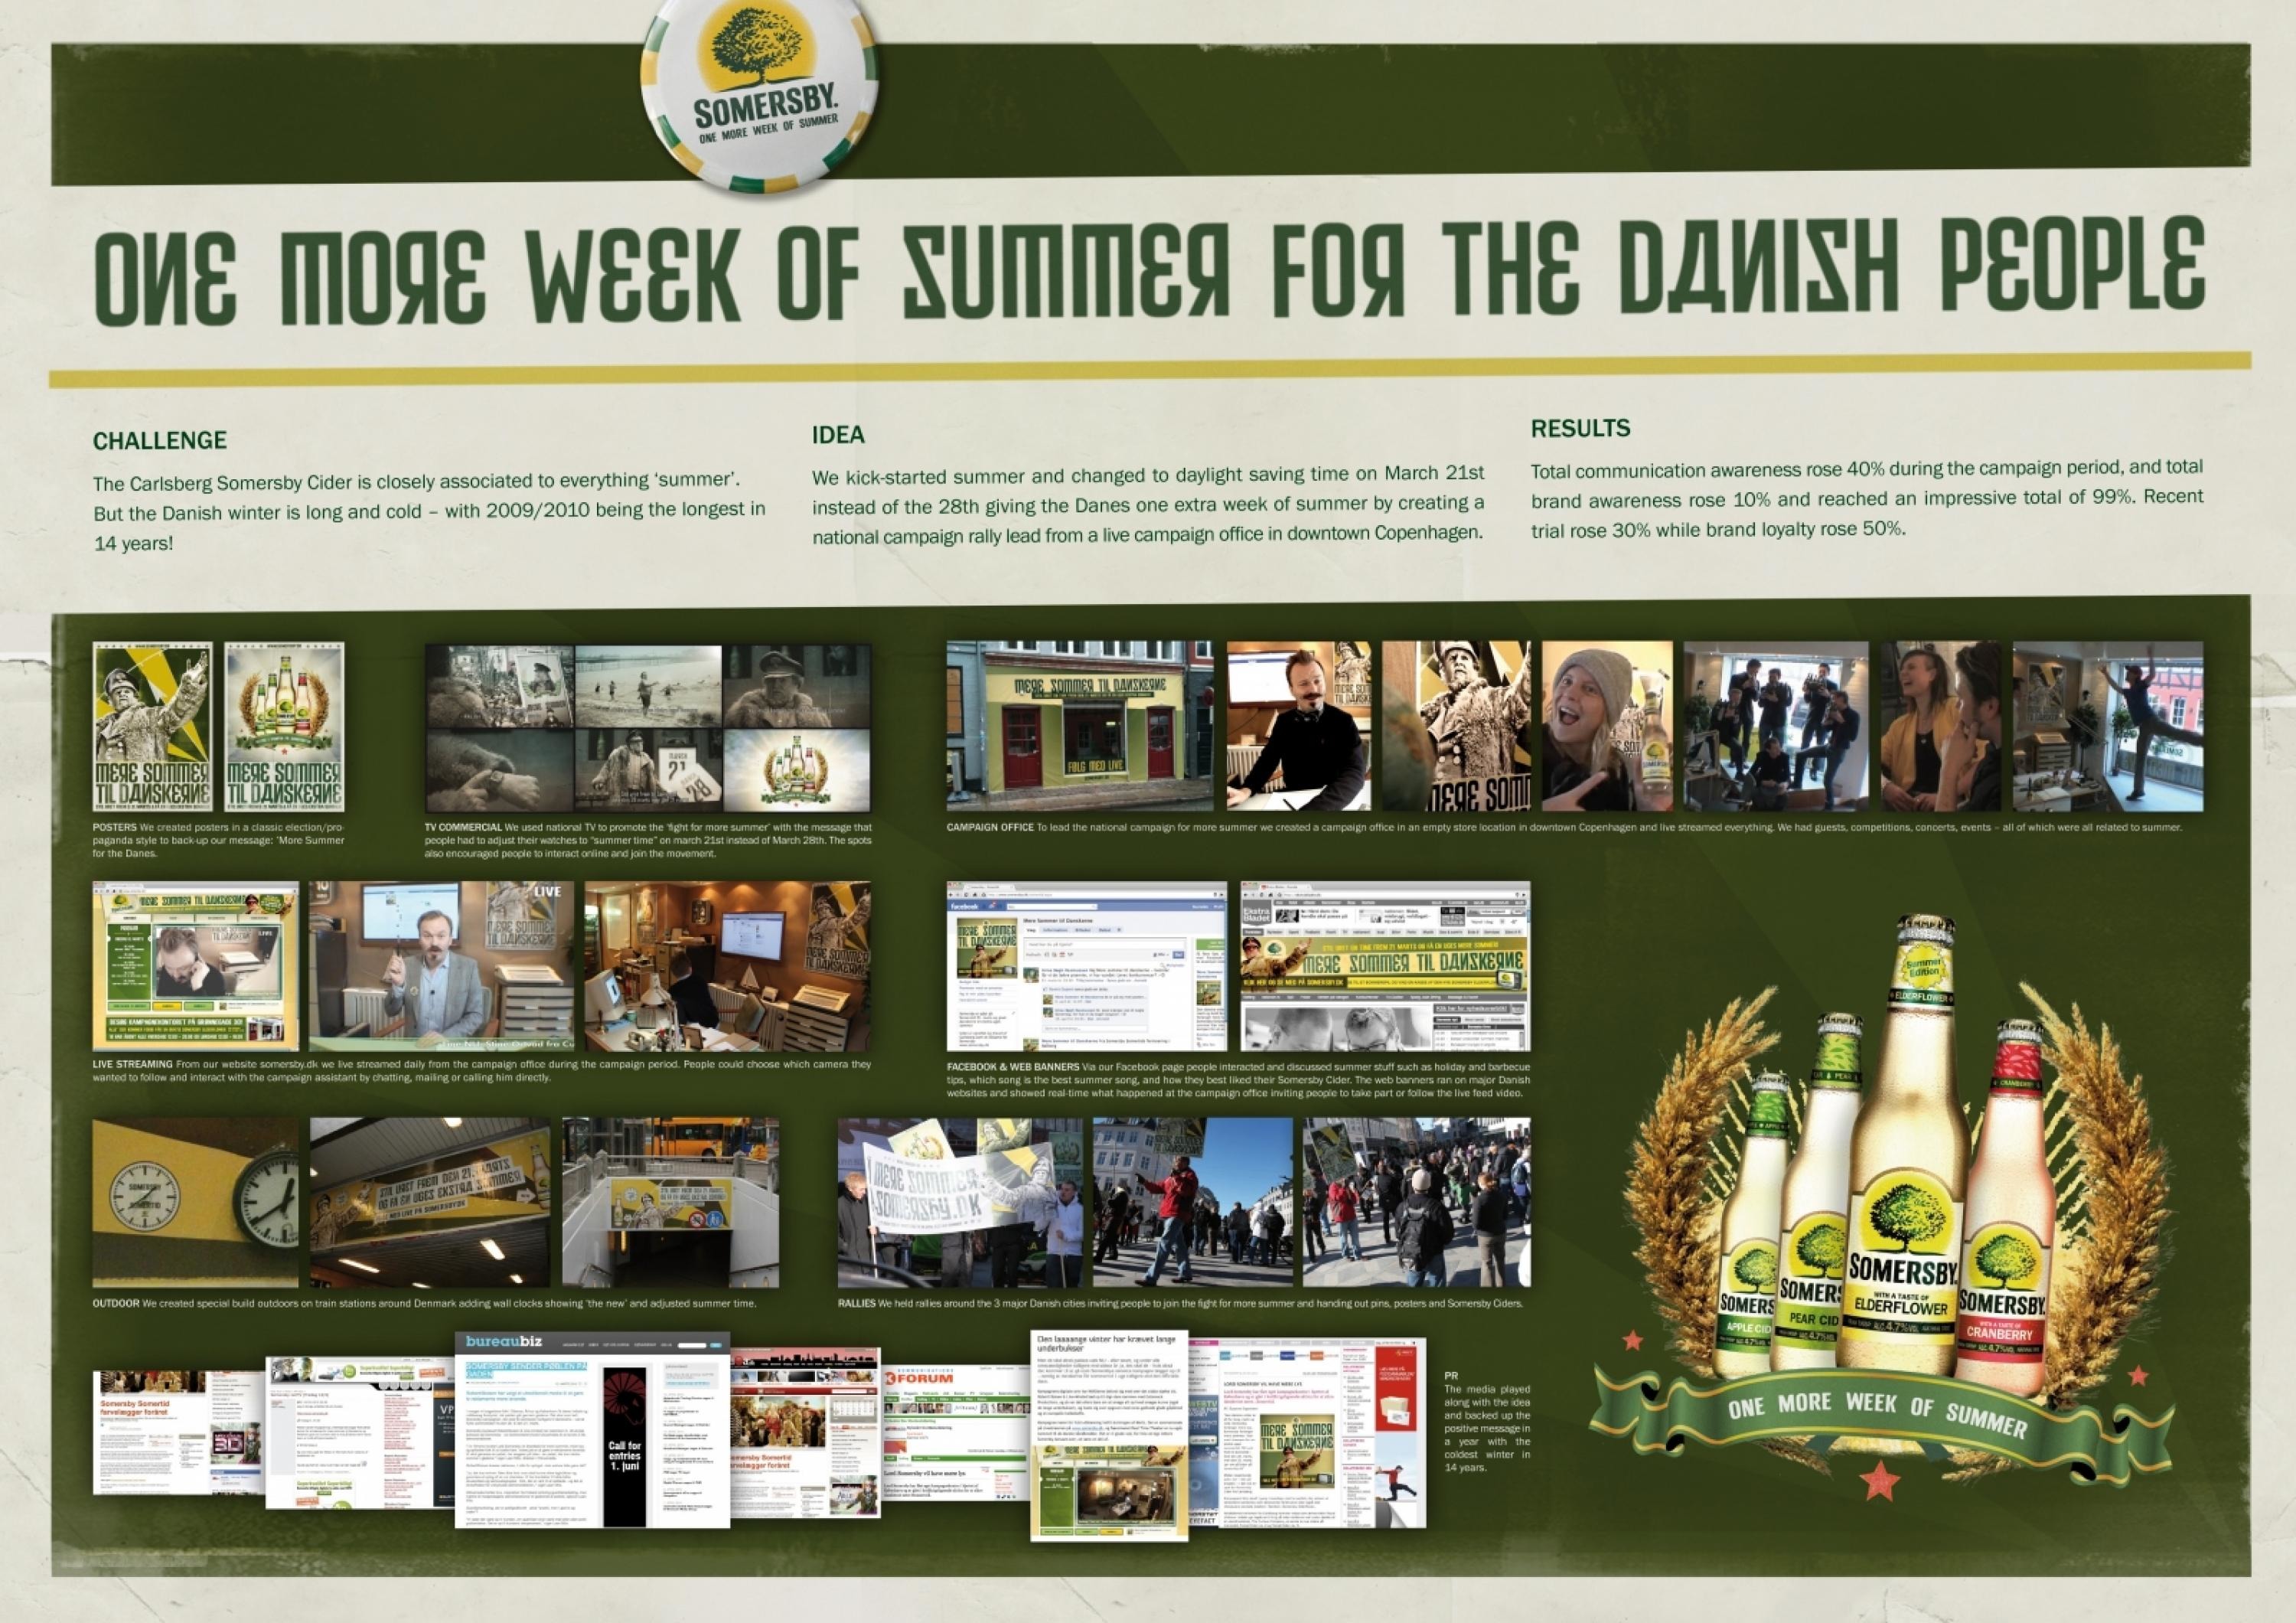 SOMERSBY ALCOHOLIC CIDER